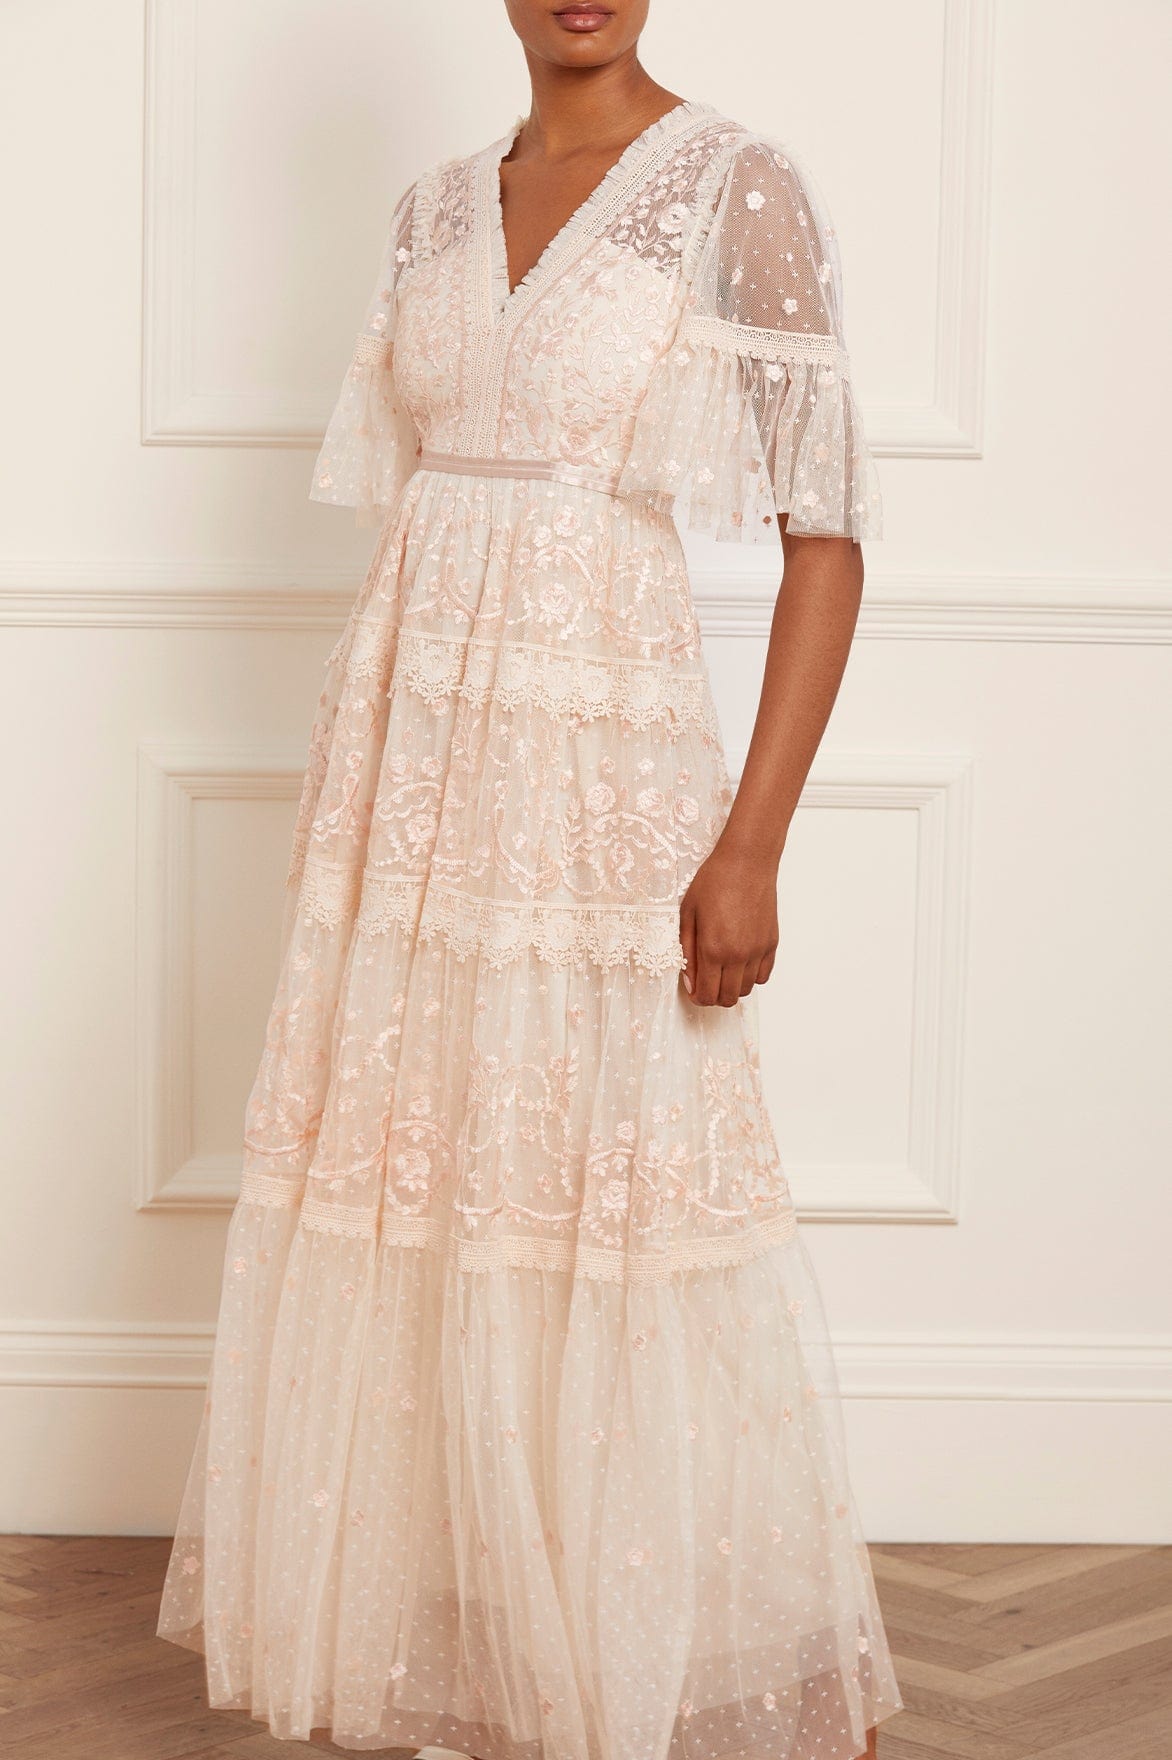 Heirloom Lace Gown, Liylah